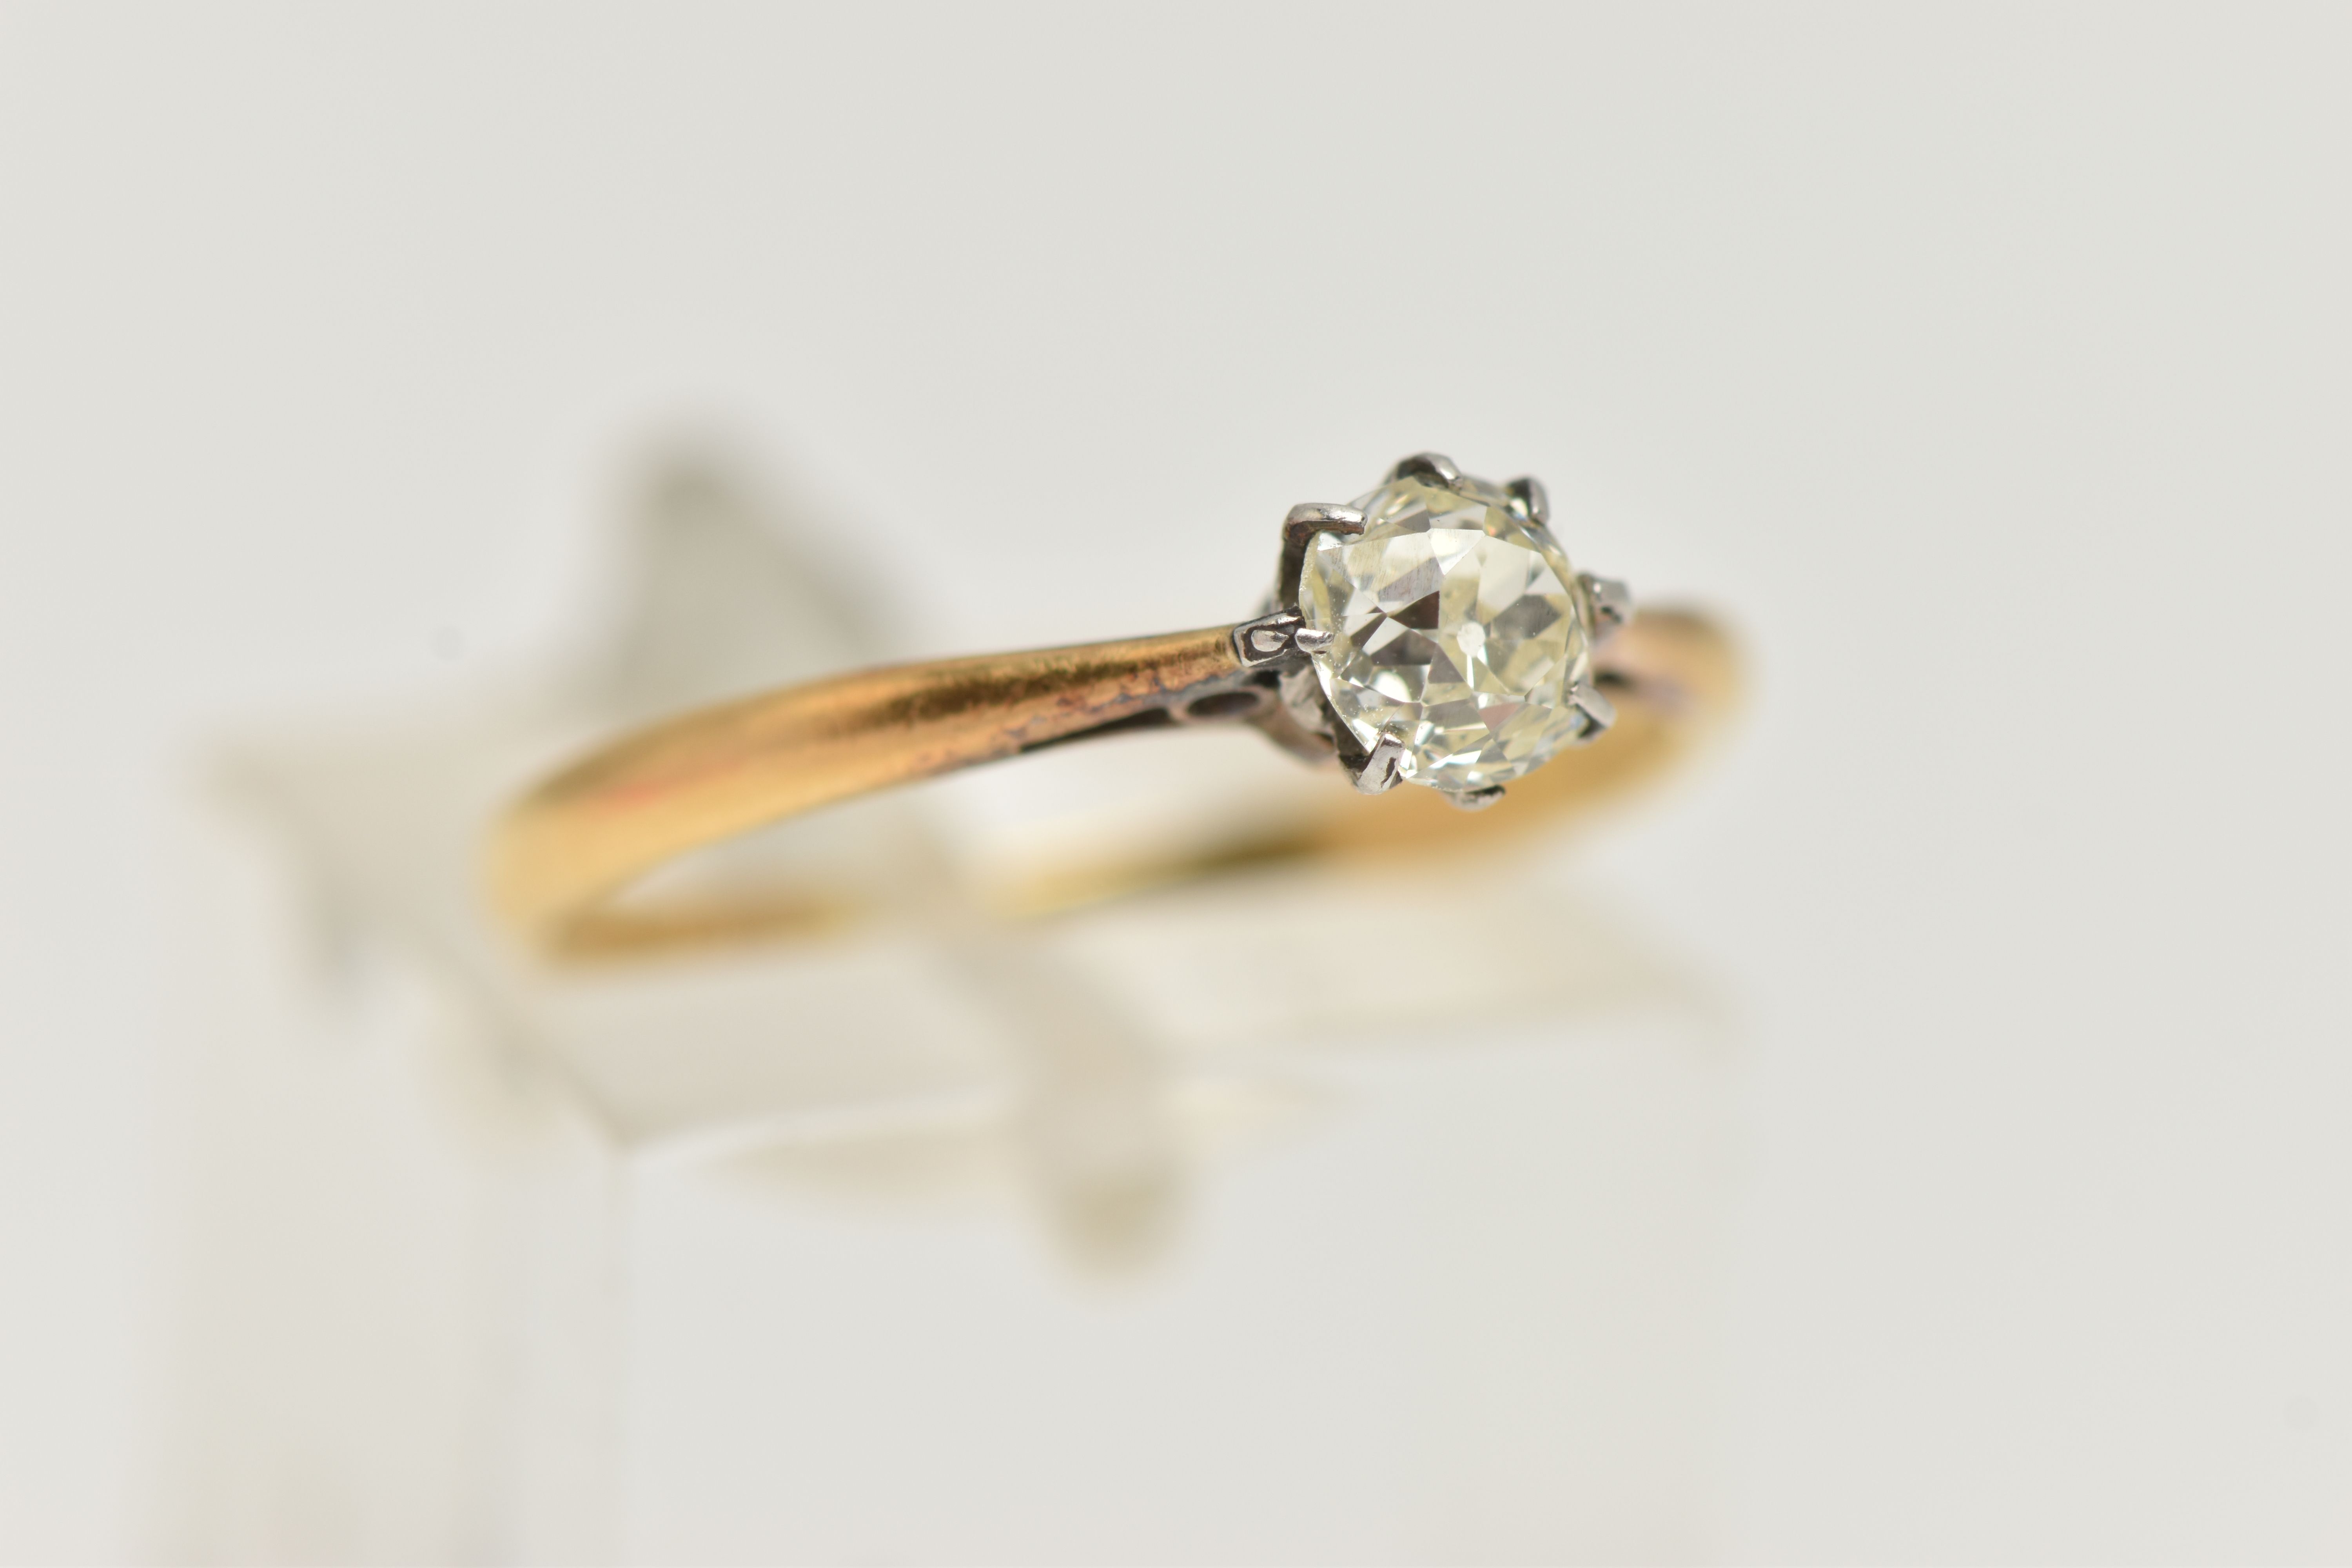 A YELLOW METAL SINGLE STONE DIAMOND RING, old cut diamond, measuring approximately 4.7mm x 4.6 x 3. - Image 4 of 4